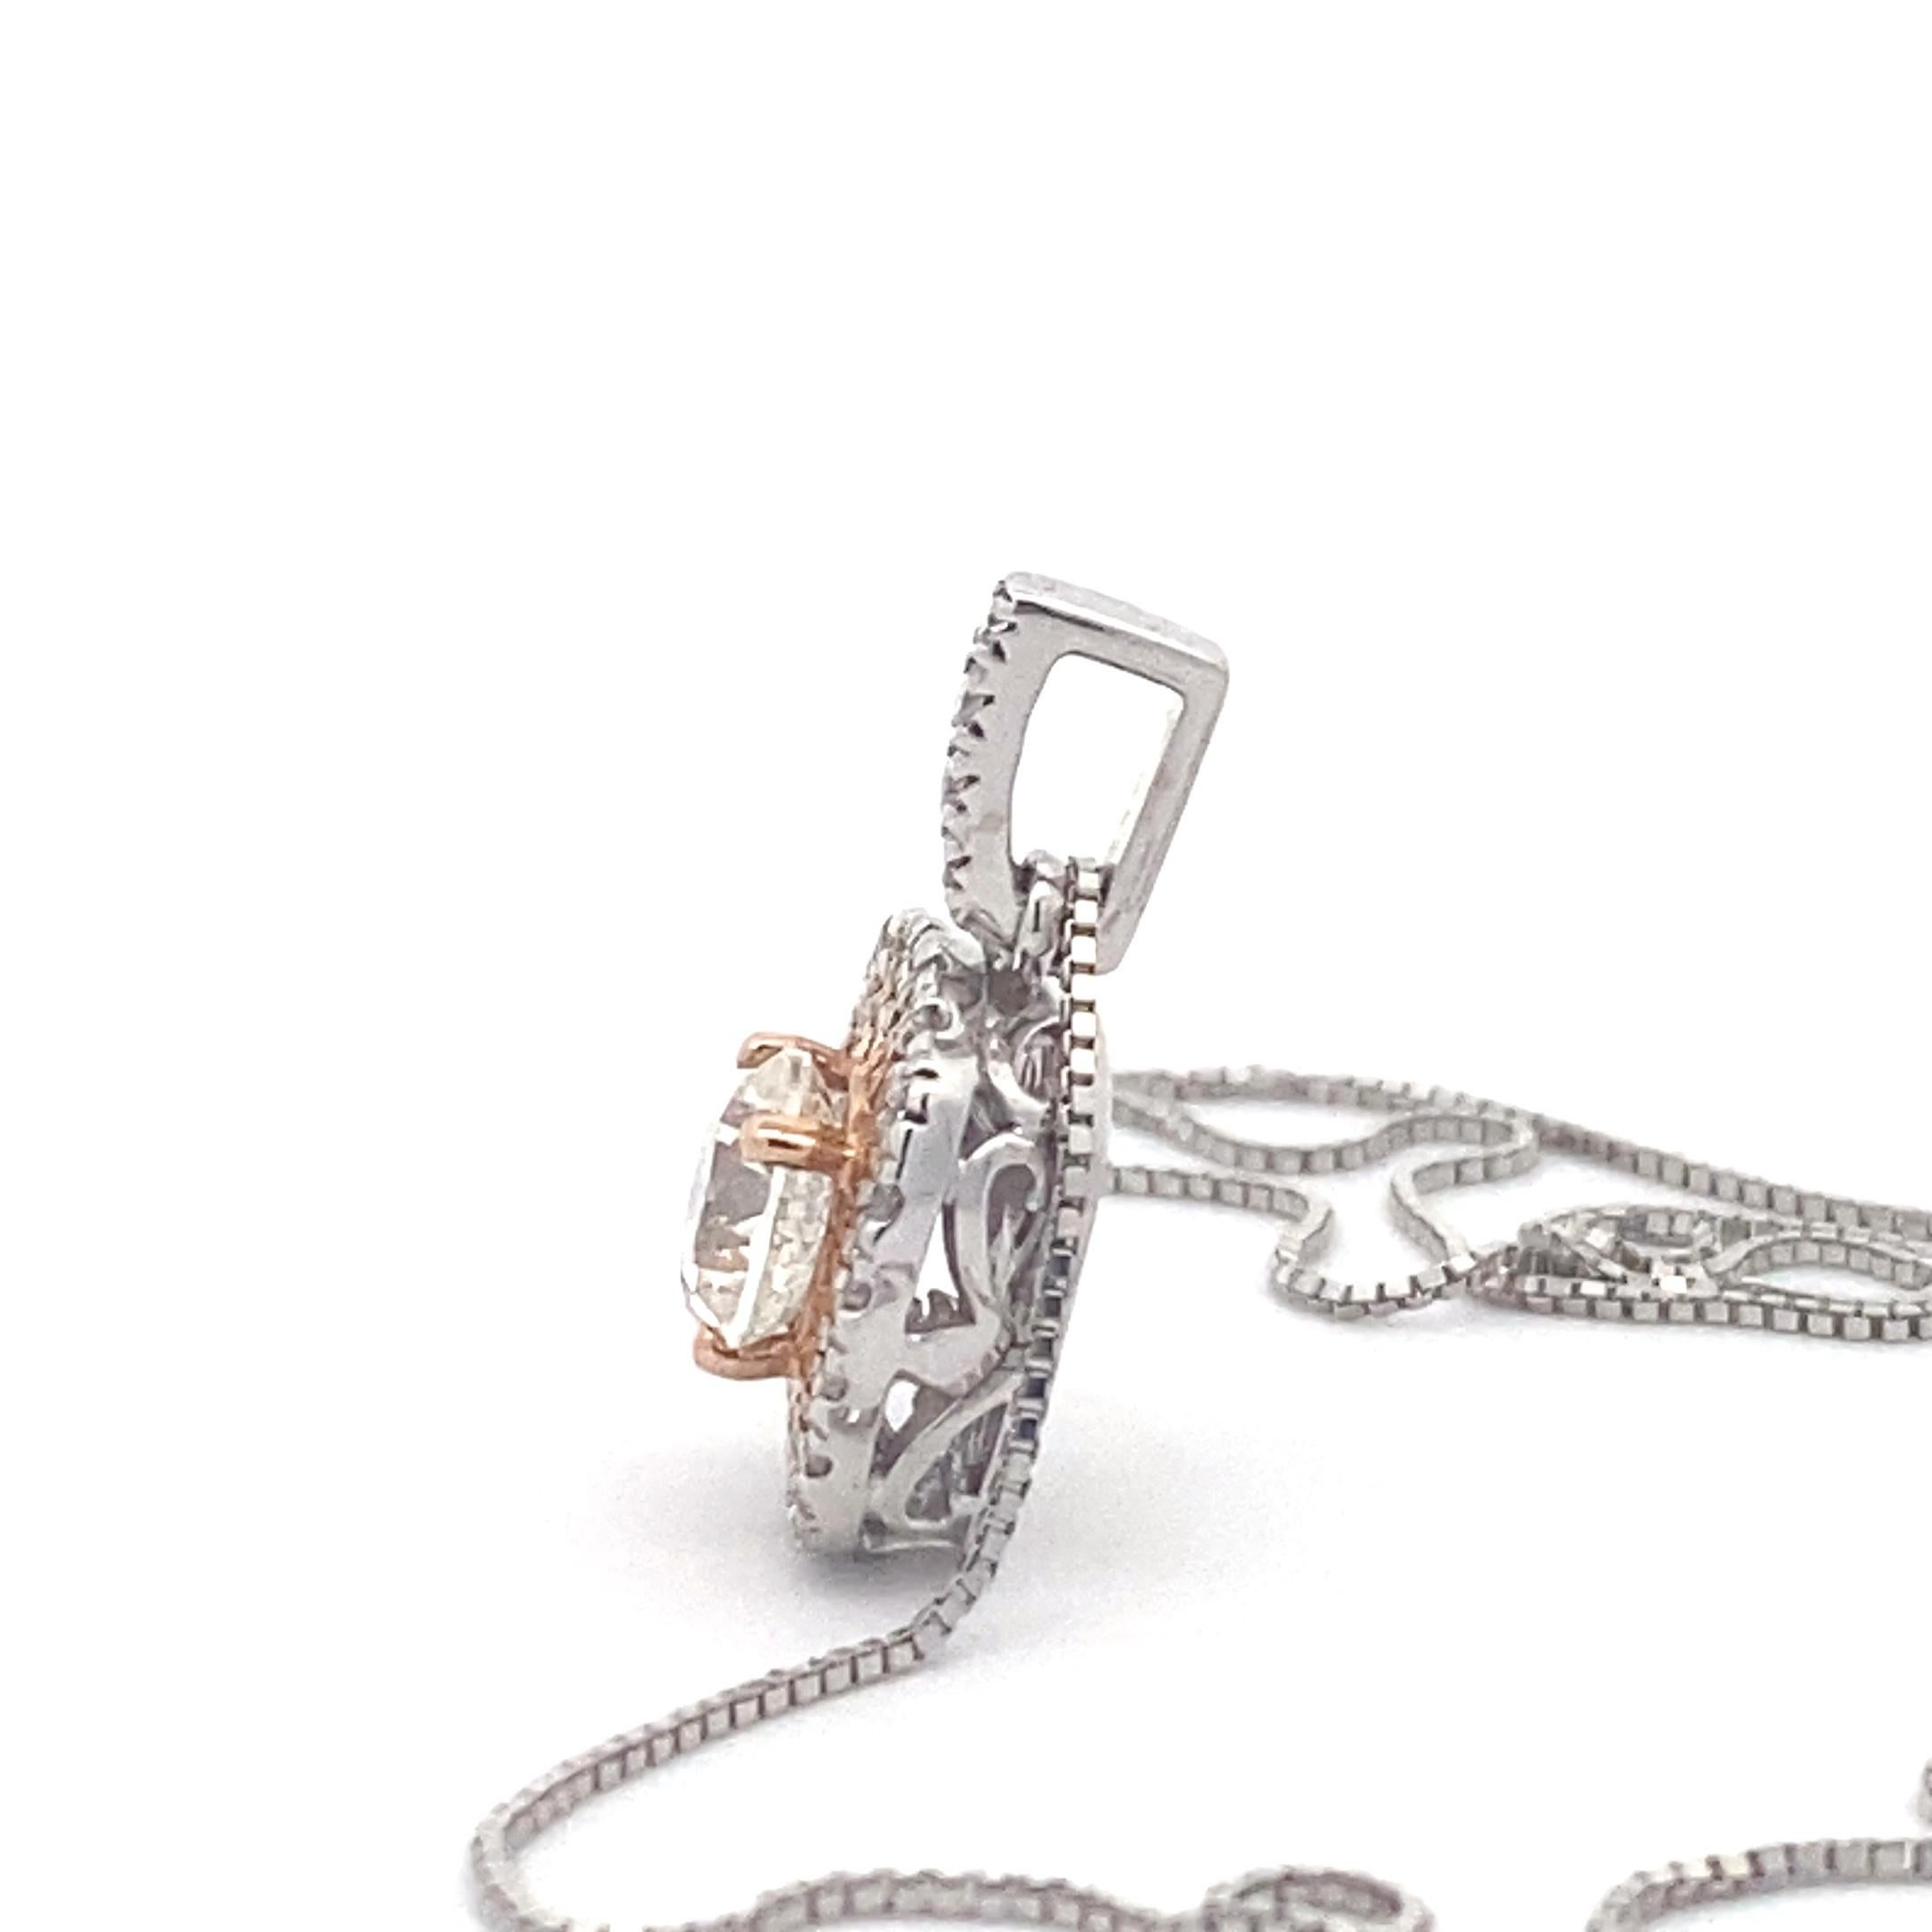 IGI 14k White and Rose Gold Pendant, Halo Style In New Condition For Sale In רמת גן, IL